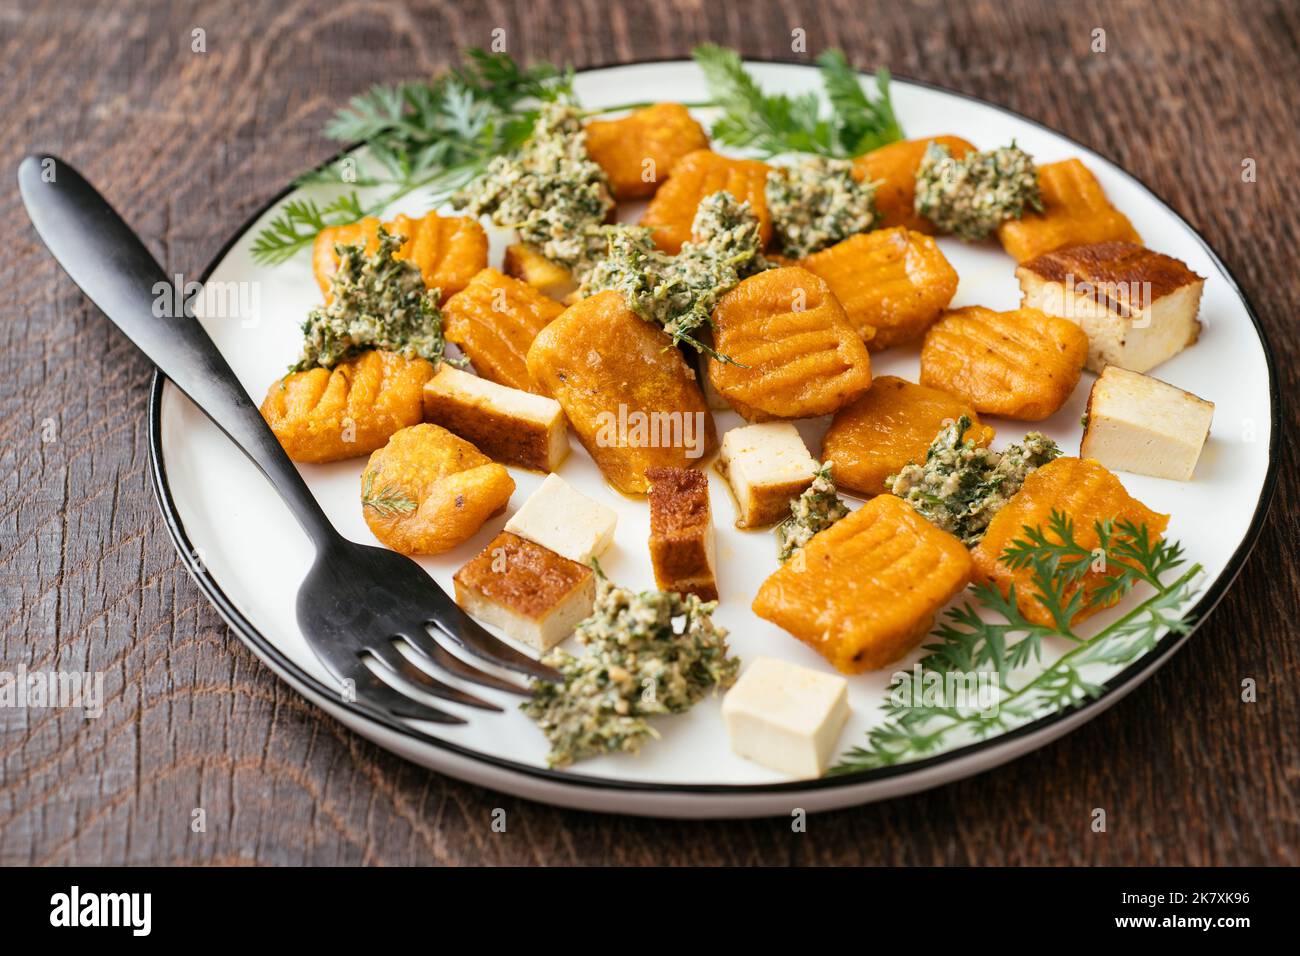 Plate with home made carrot gnocchi with a carrot-top pesto and smoked tofu. Stock Photo